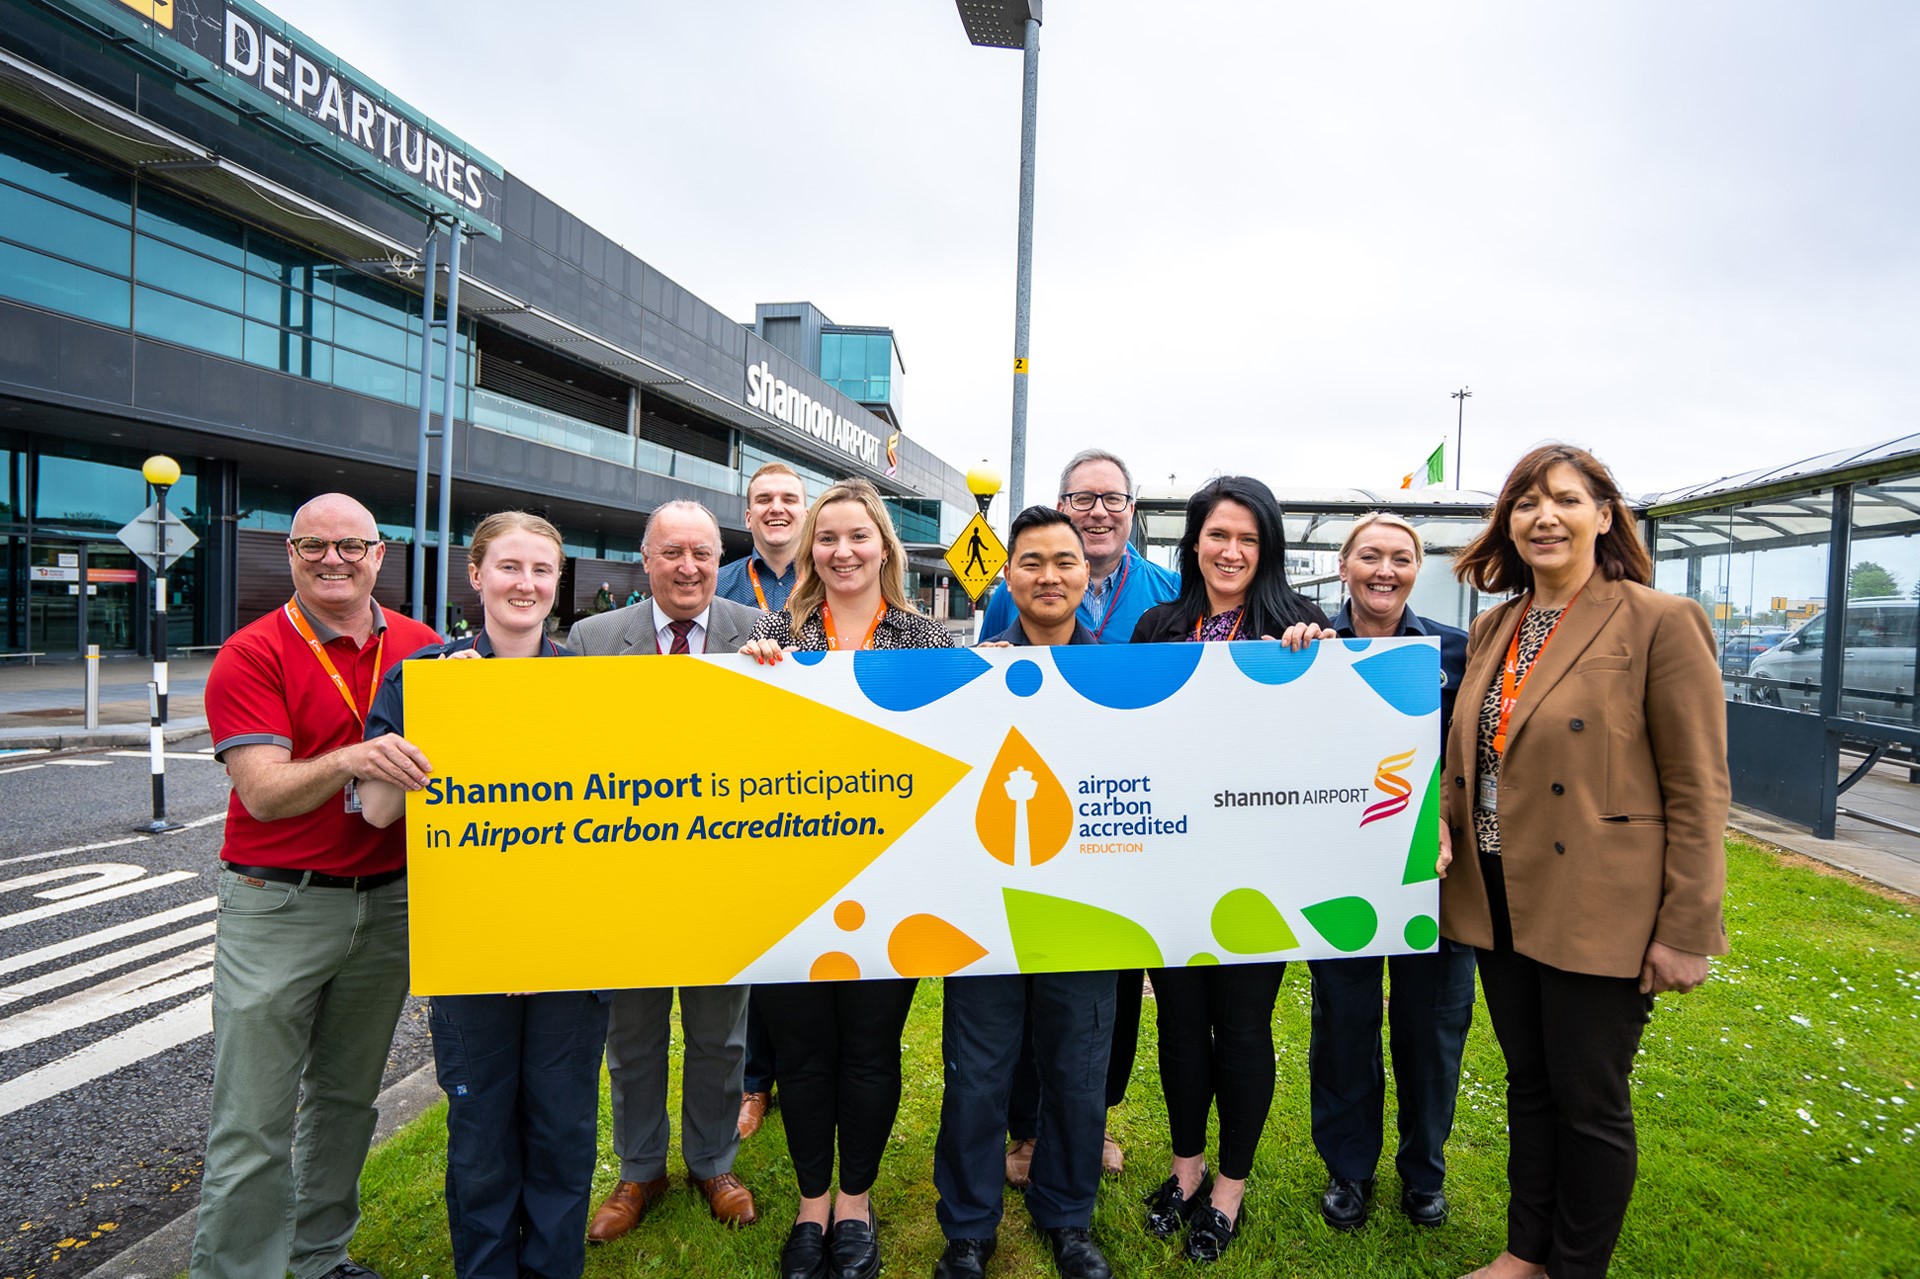 Shannon Airport reaches new heights with Europe’s Airport Carbon Accreditation programme. Staff at The Shannon Airport Group celebrate receiving Carbon Accreditation level 2 by the globally recognised Airport Council International (ACI). NO FREPRO FEE